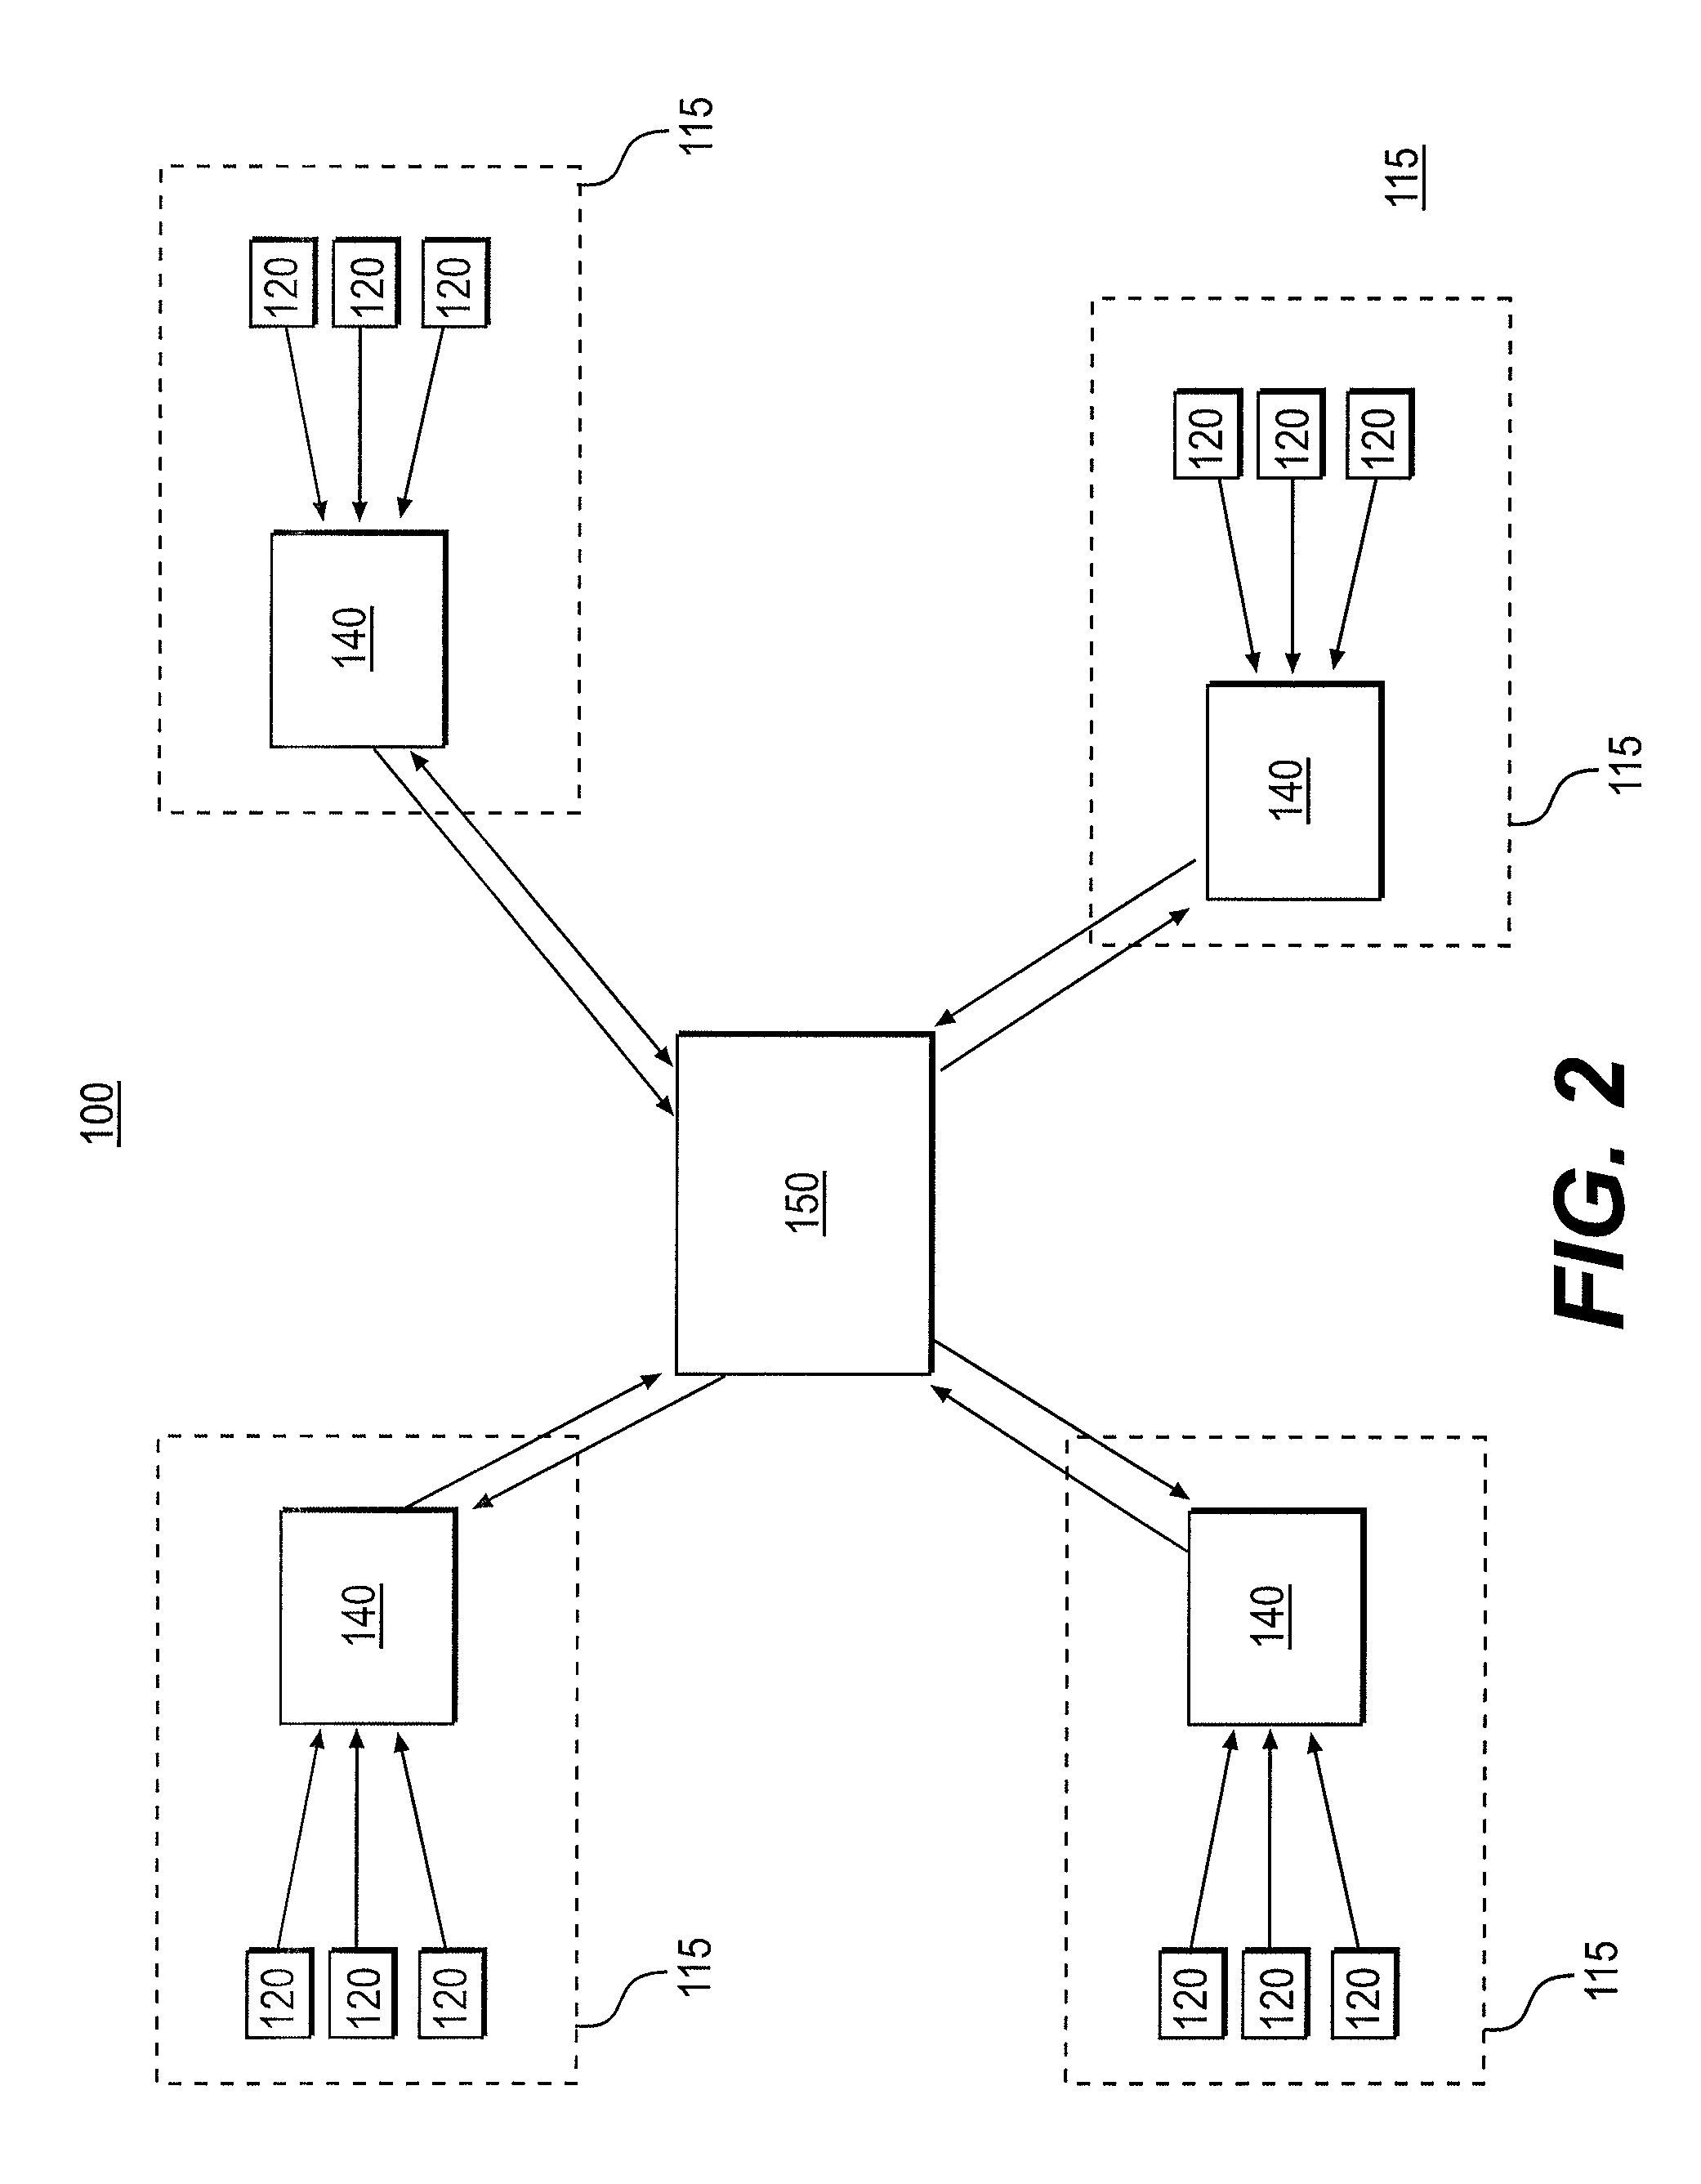 Trigger-based data collection system